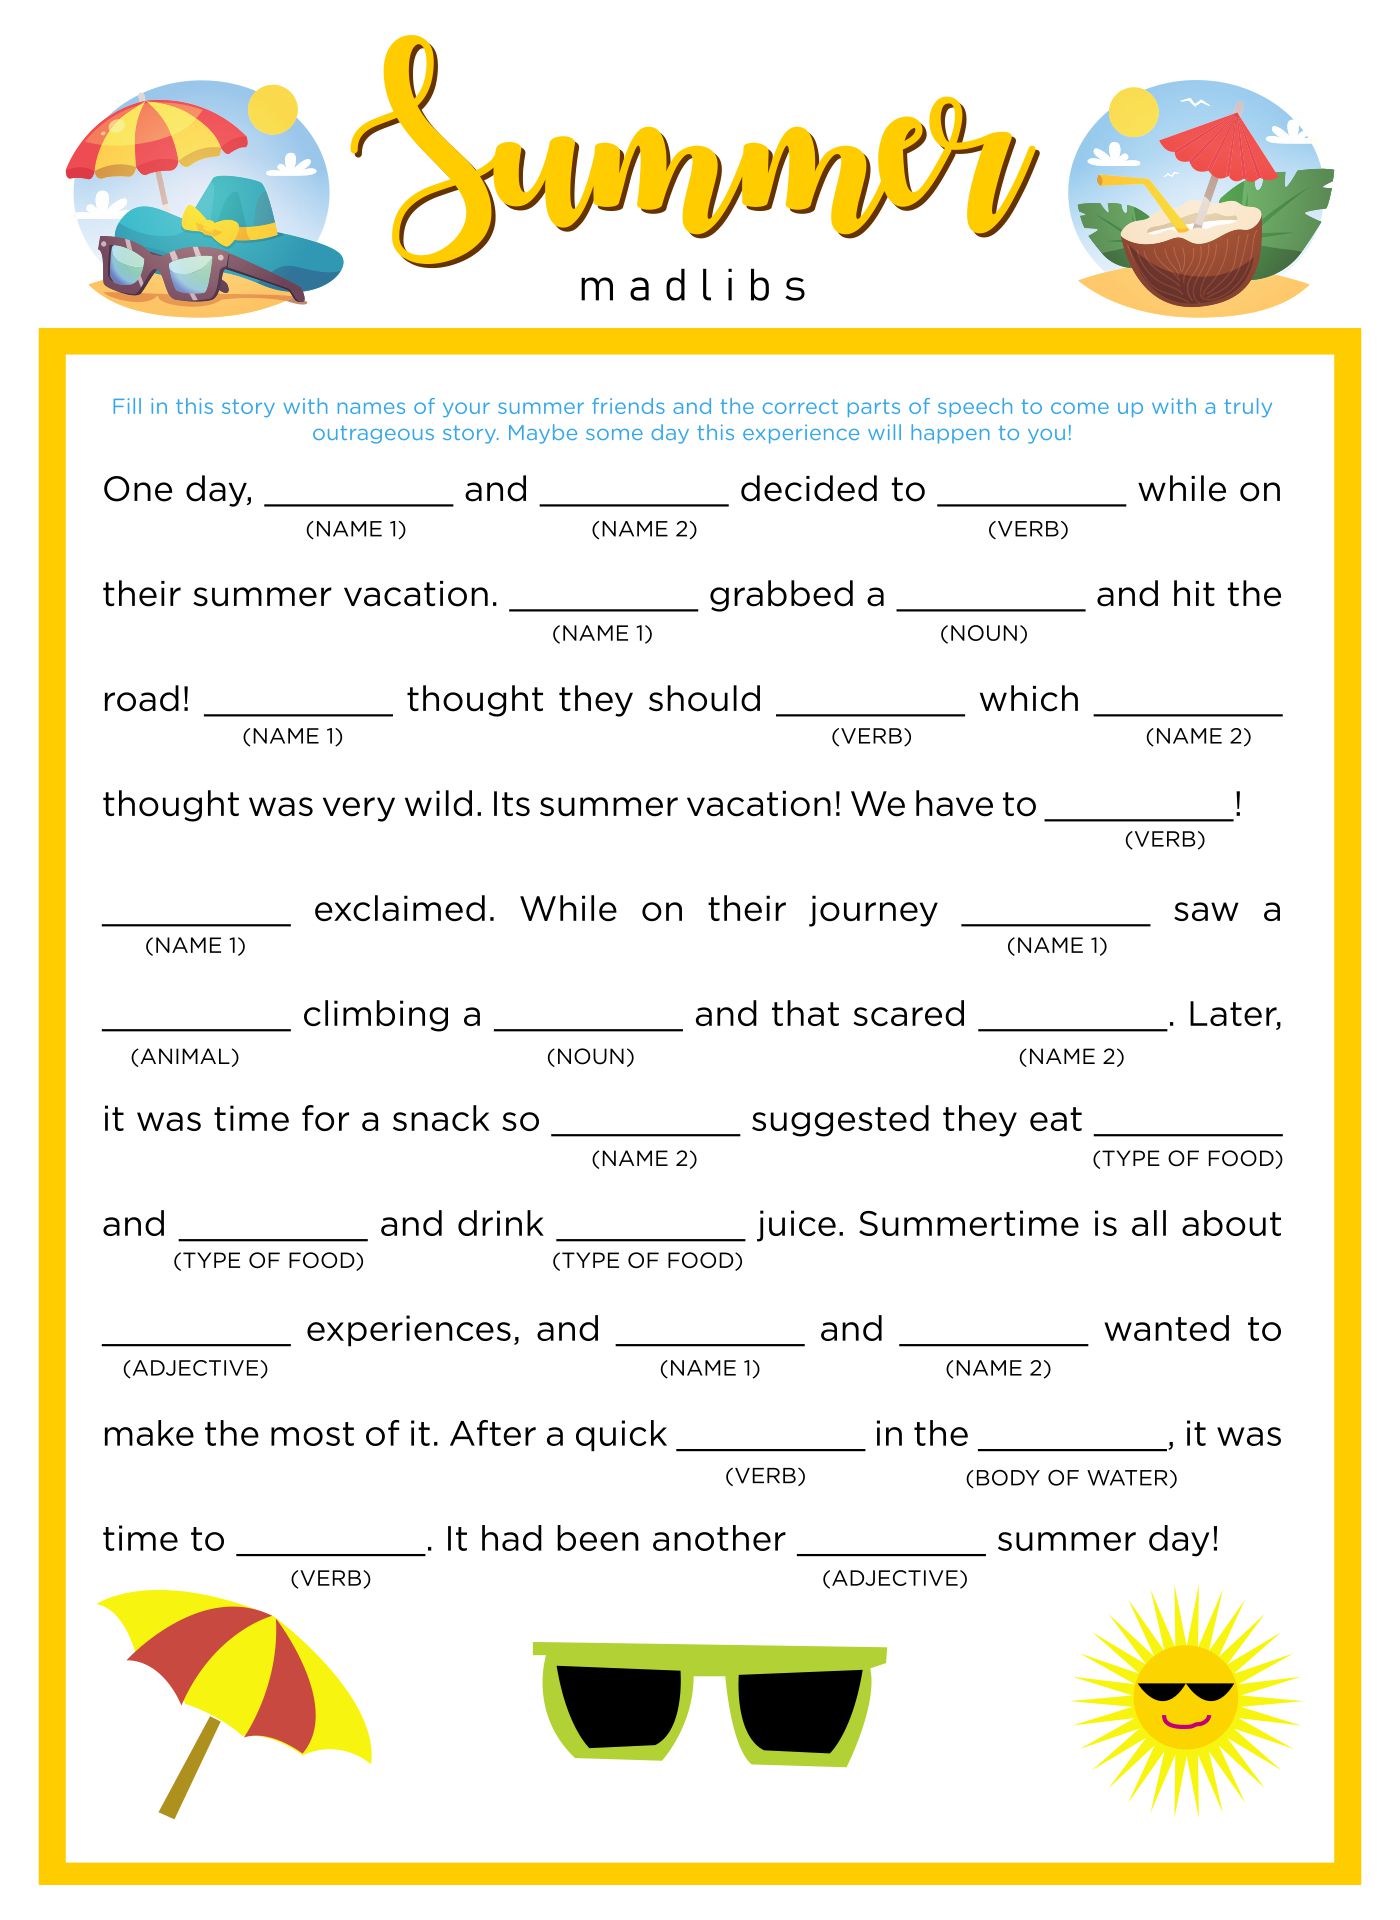 8-best-images-of-camping-mad-libs-printable-free-printable-camping-mad-libs-free-printable